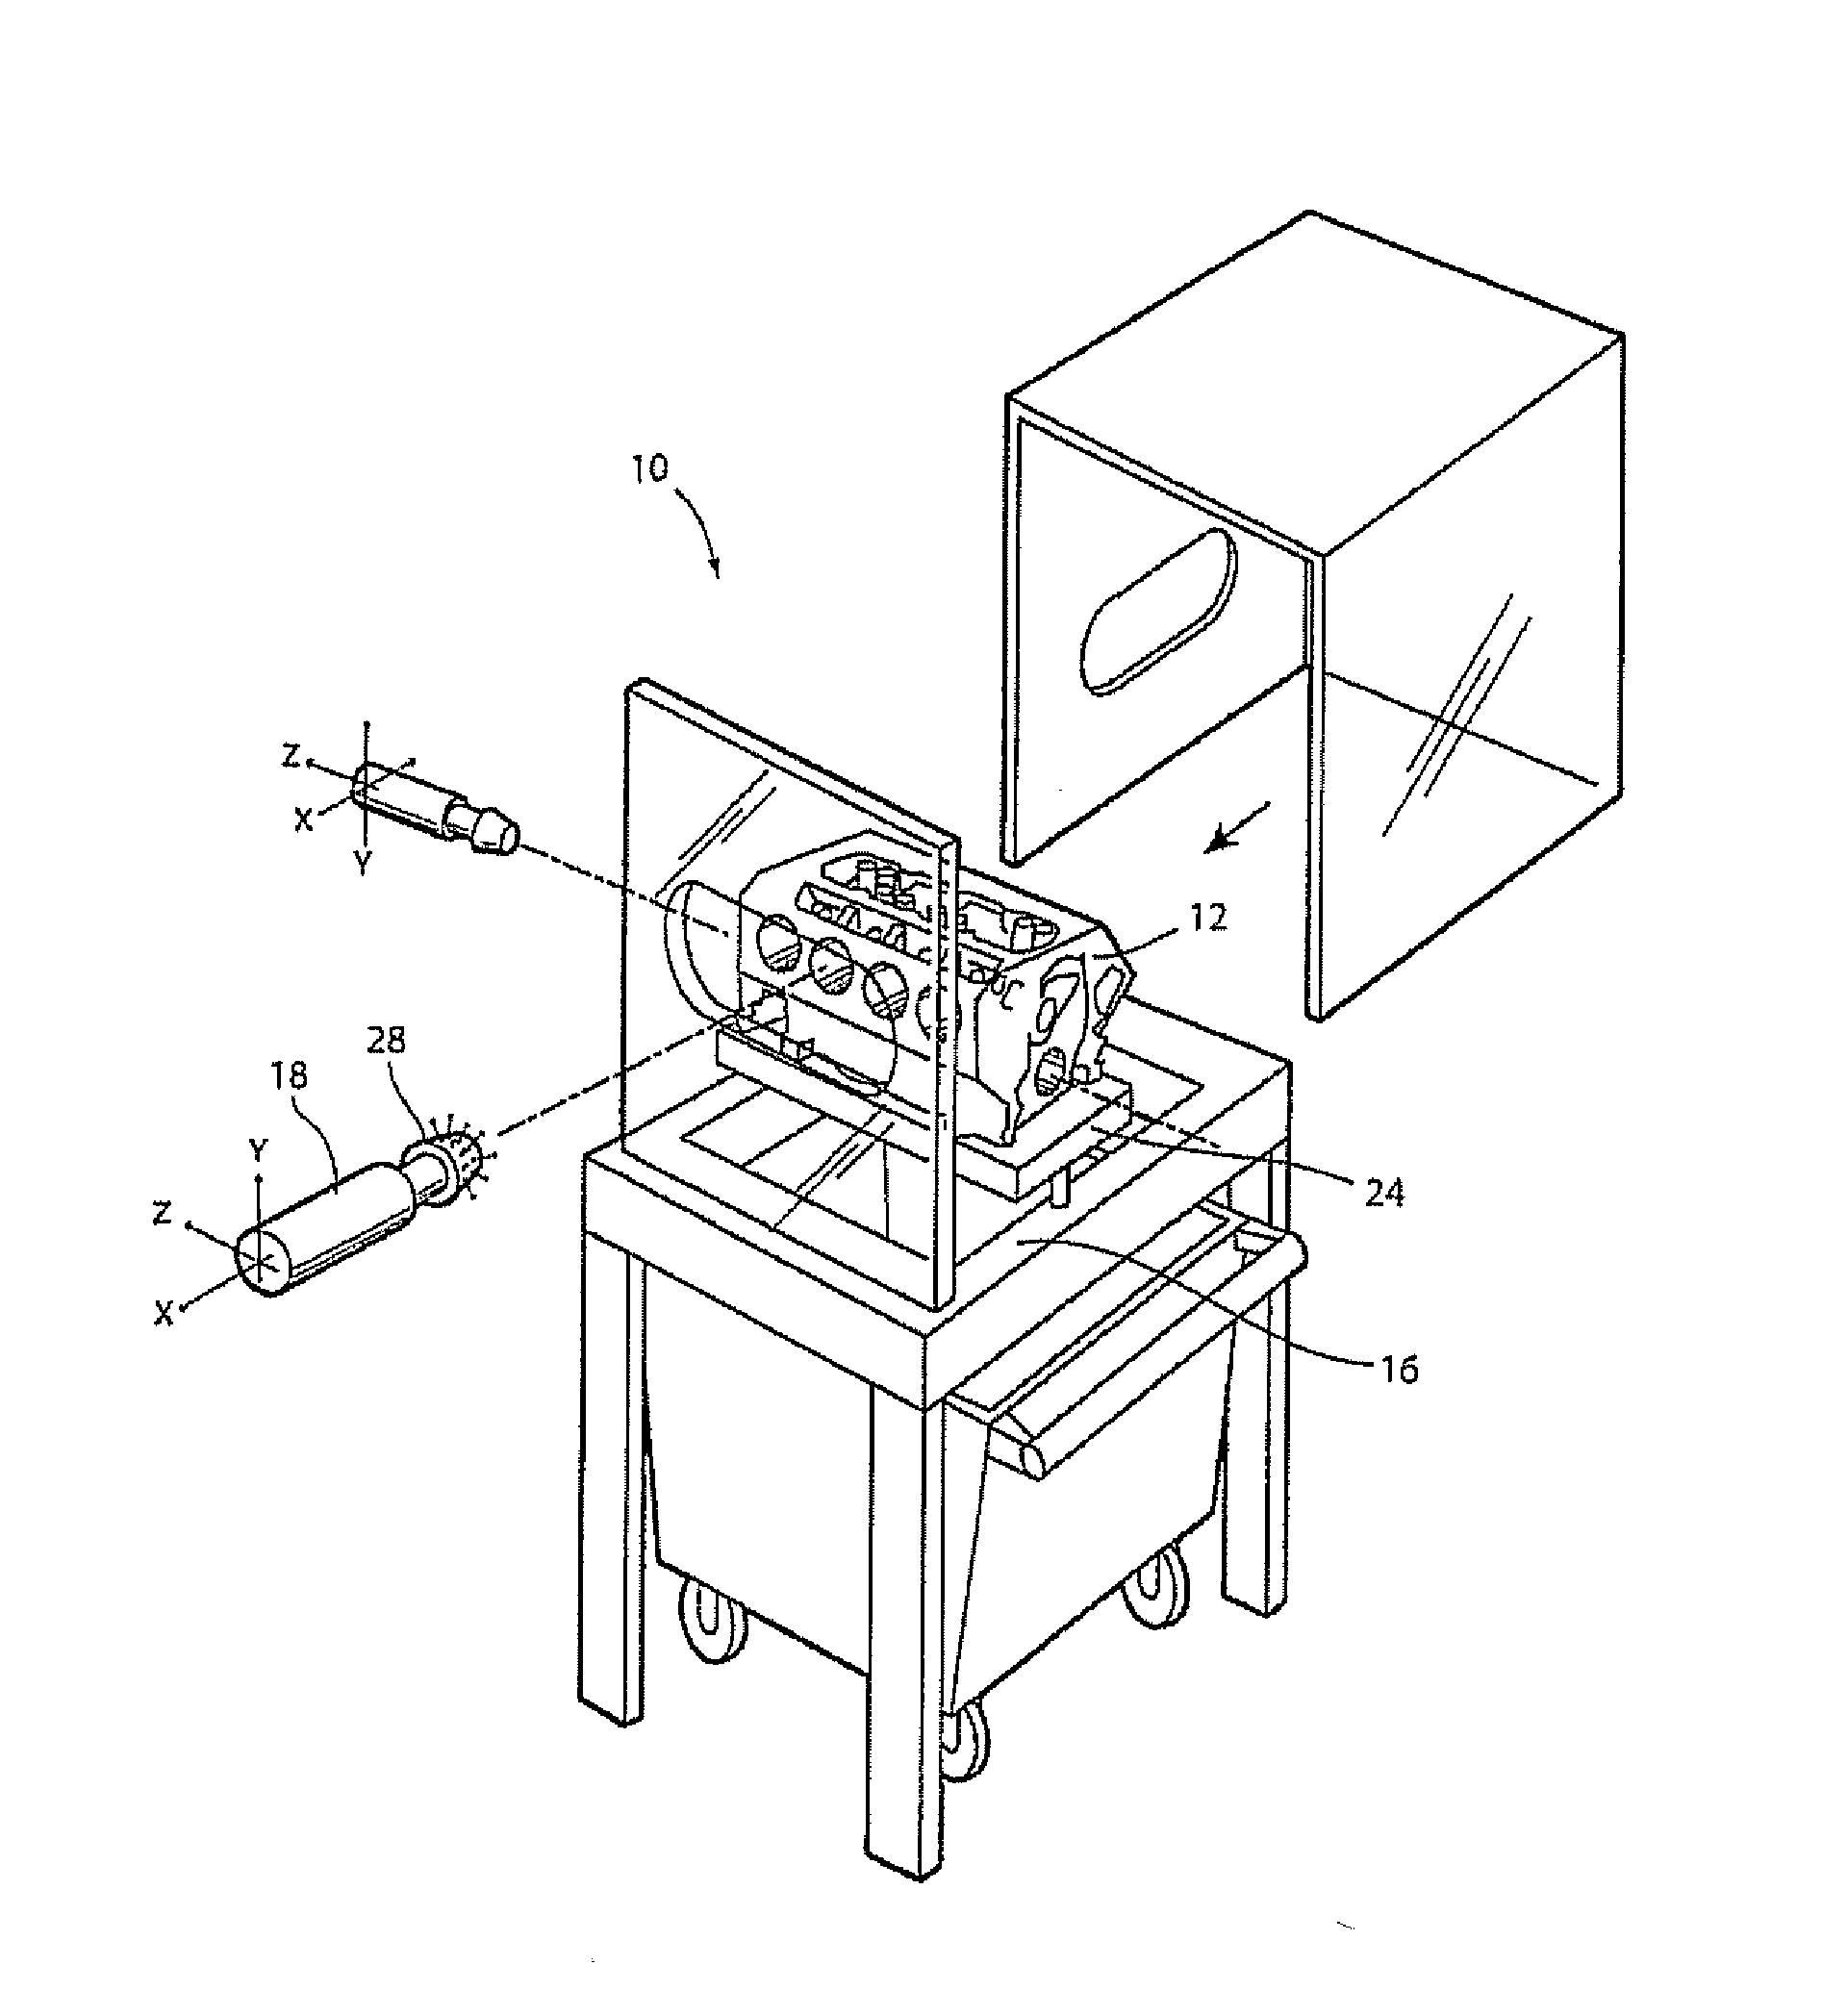 Apparatus for inspecting machined bores